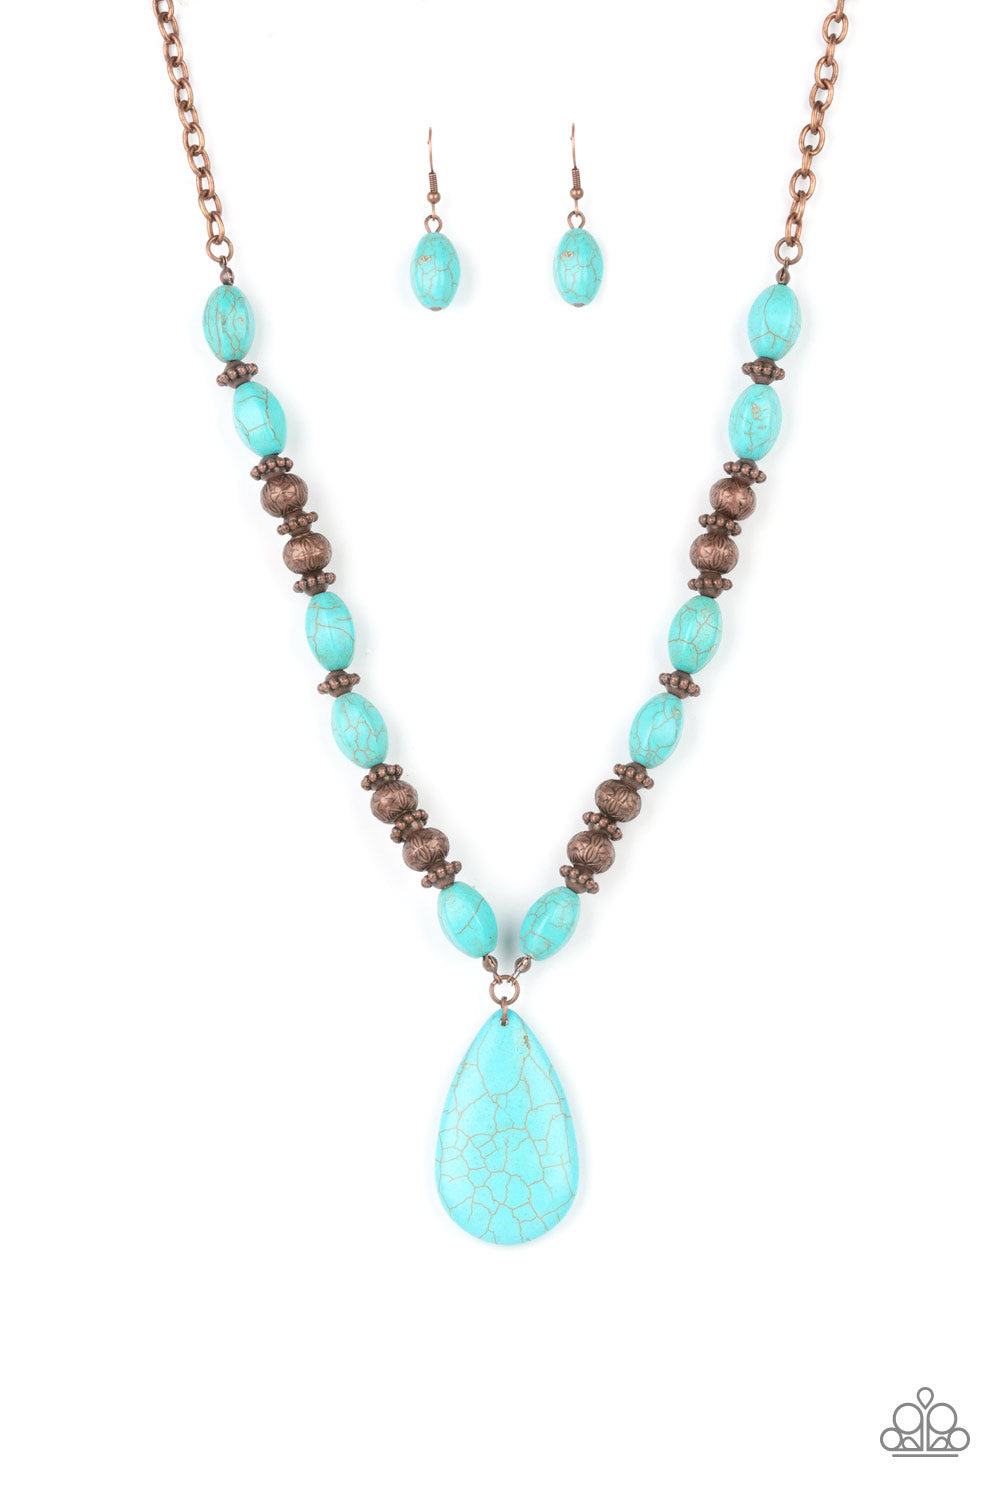 Blazing Saddles - Copper Turquoise Stone Necklaces - Paparazzi Accessories faceted oval turquoise stones, studded copper accents, and floral stamped copper beads are threaded along an invisible wire that attaches to a classic copper chain. An oversized turquoise teardrop stone swings from the bottom of the beaded strand, creating an earthy pendant below the collar. Features an adjustable clasp closure.